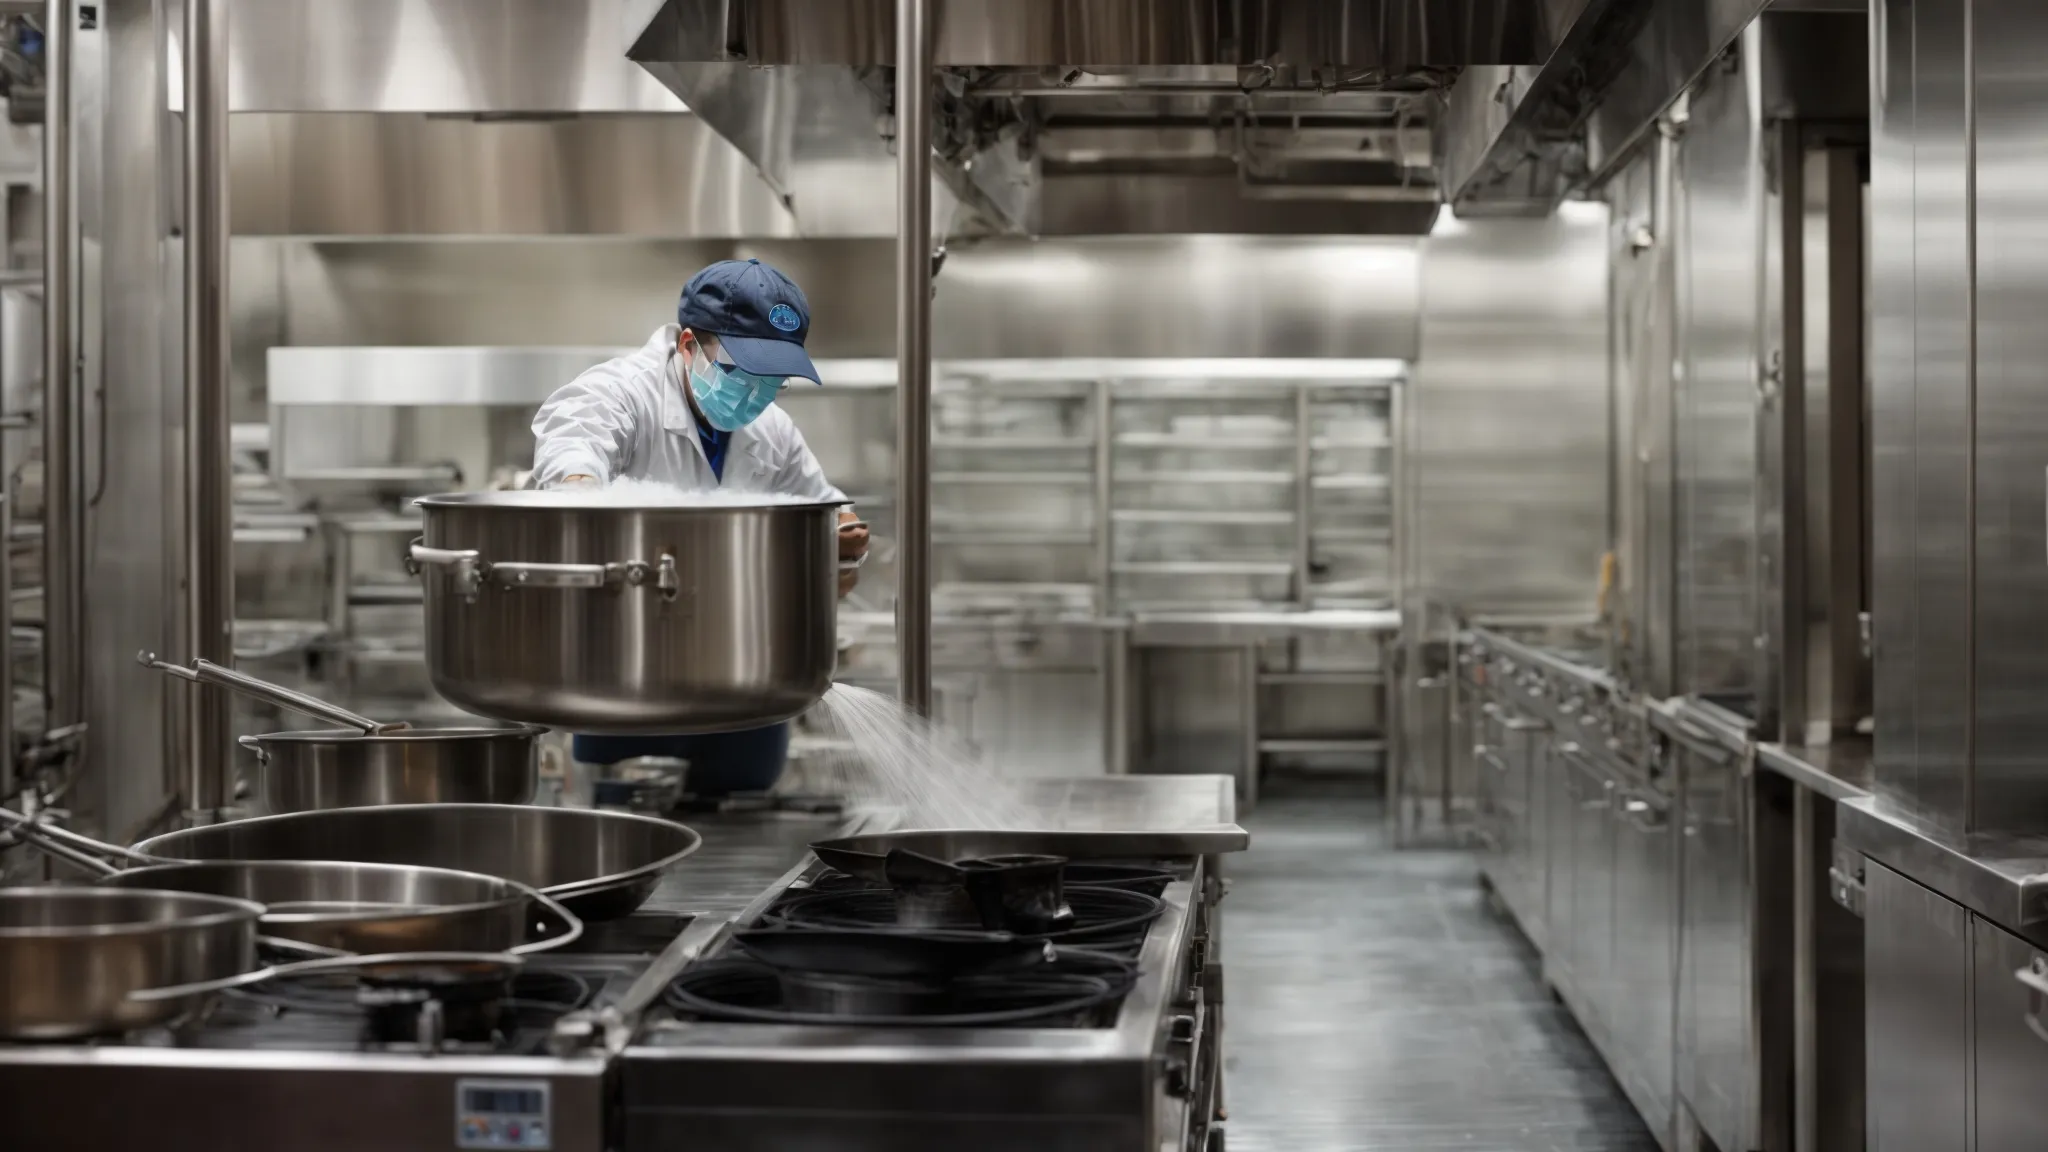 a professional cleaner power-washes the interior of a large, stainless steel commercial kitchen hood.